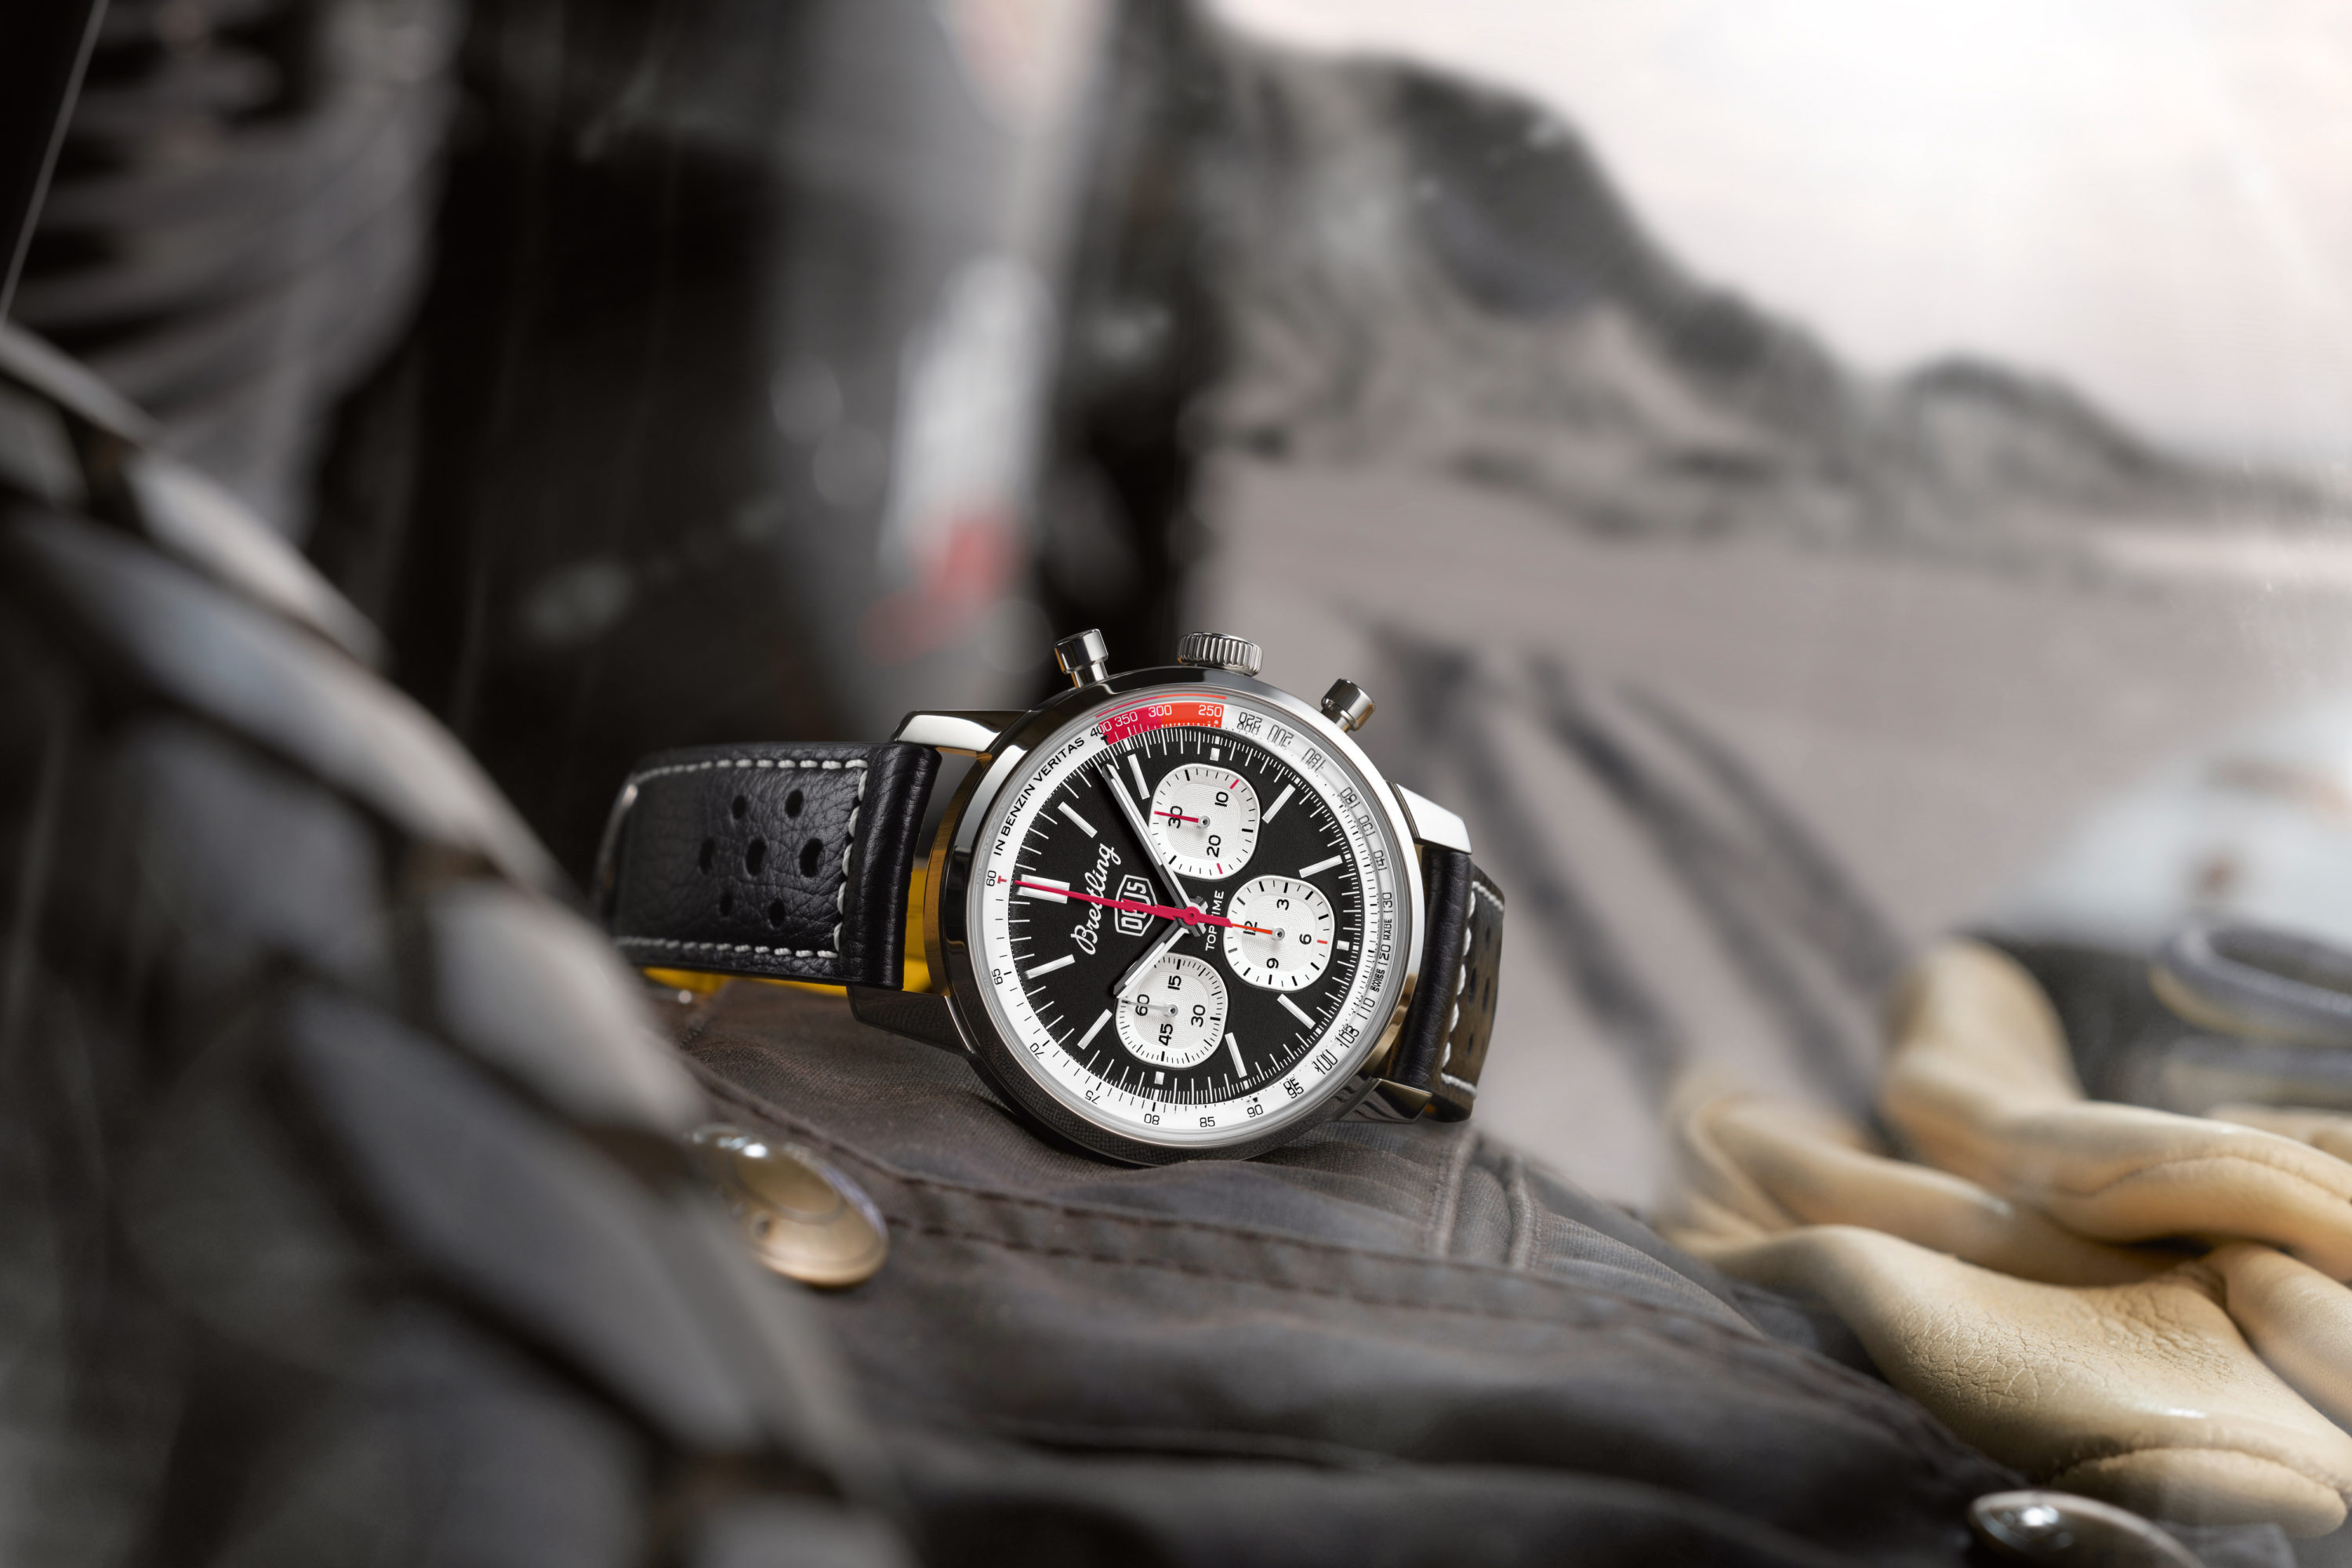 The New Breitling Top Time Triumph